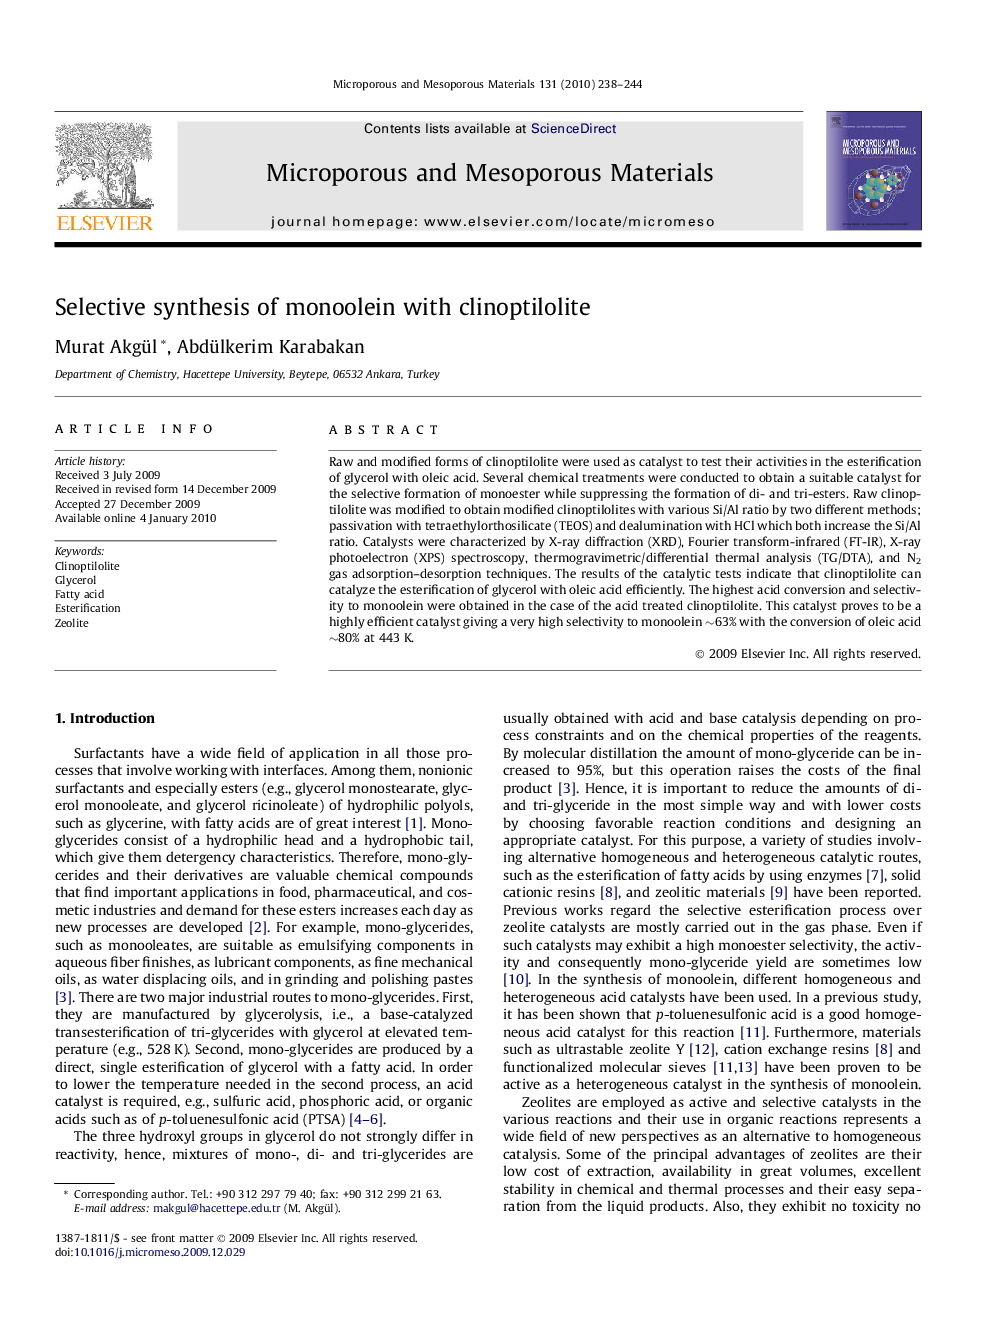 Selective synthesis of monoolein with clinoptilolite